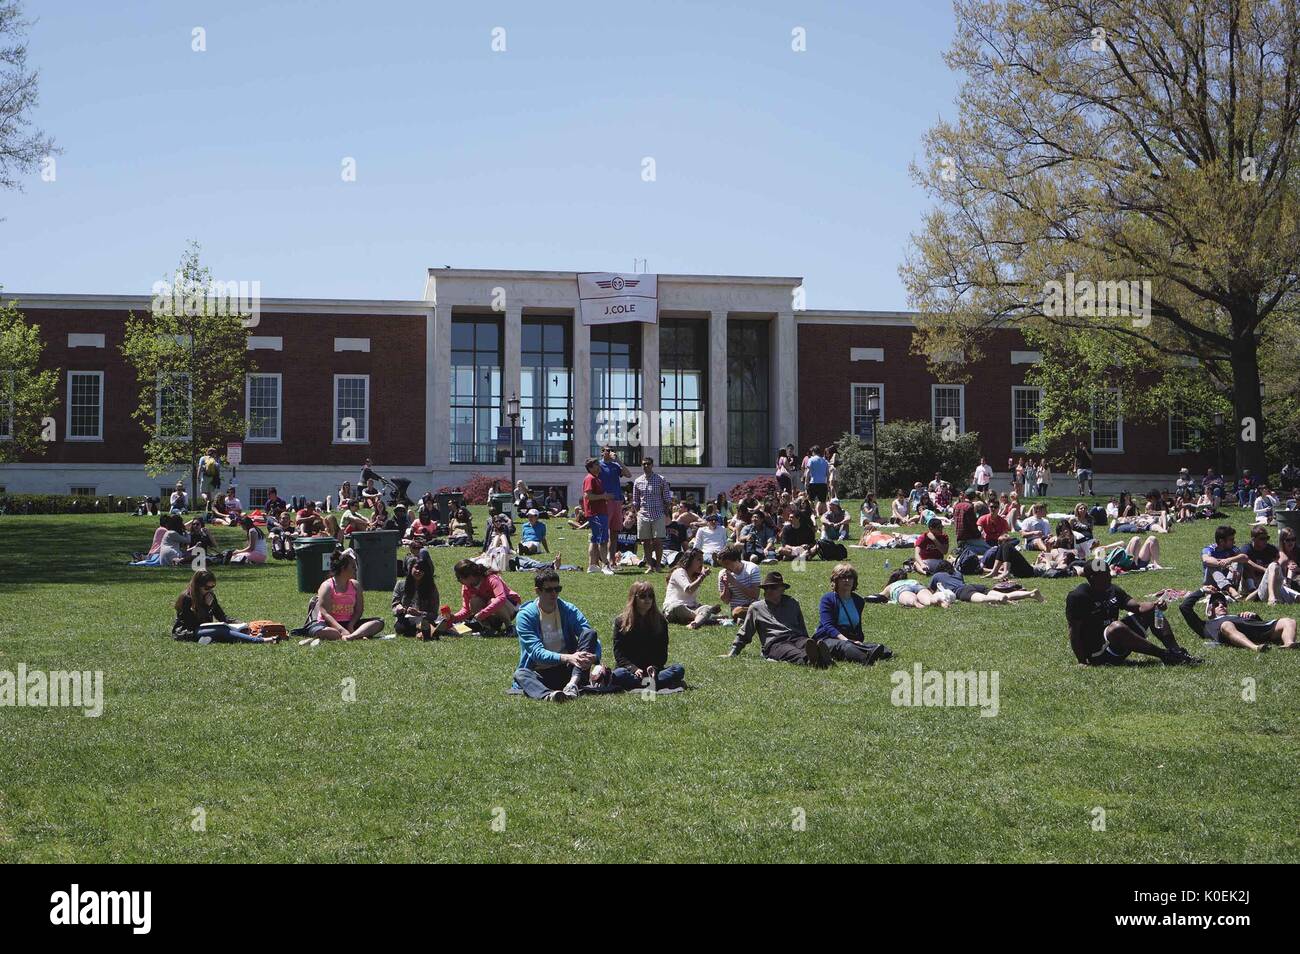 College students and members of the Johns Hopkins and Baltimore communities sit on the beach, a large grassy area in front of the Milton S. Eisenhower Library, during Spring Fair, an annual festival with music, food, shopping, and more that takes place every spring on the Homewood campus of the Johns Hopkins University in Baltimore, Maryland. 2014. Courtesy Eric Chen. Stock Photo